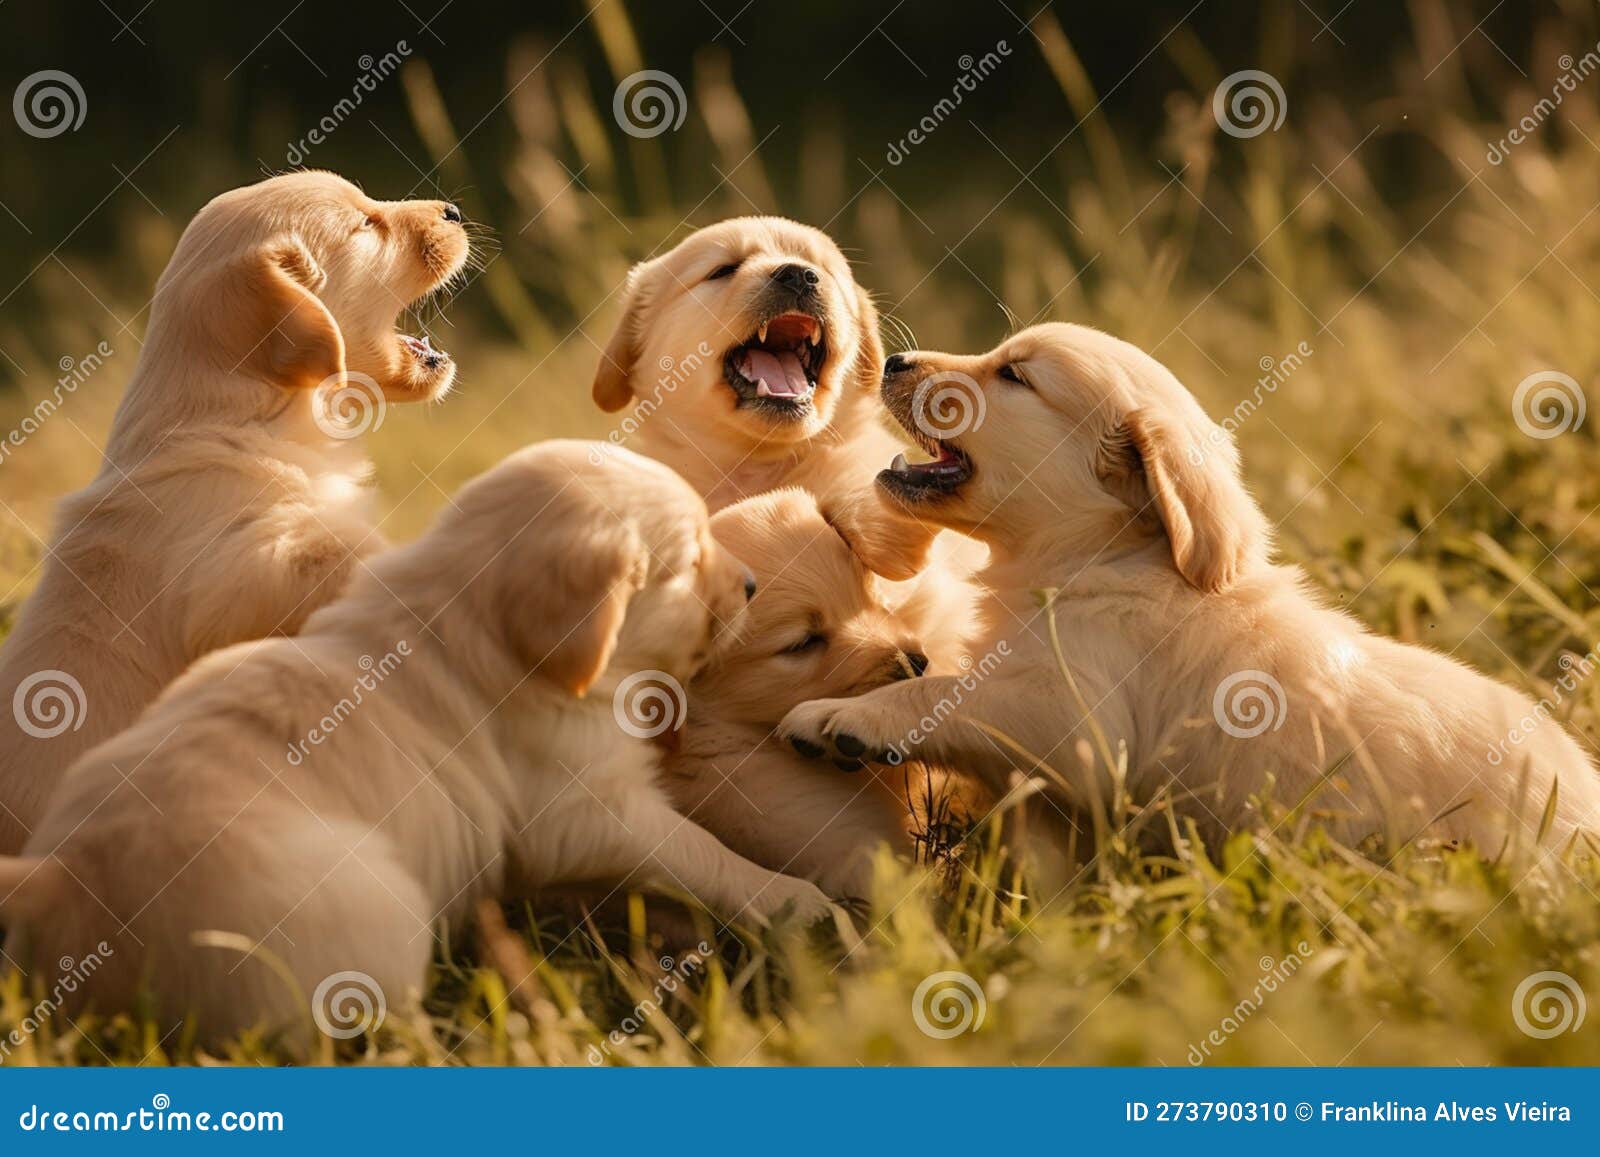 a group of golden retriever puppies playfully tumbling over one another in a grassy field, joyful expressions , ai generative